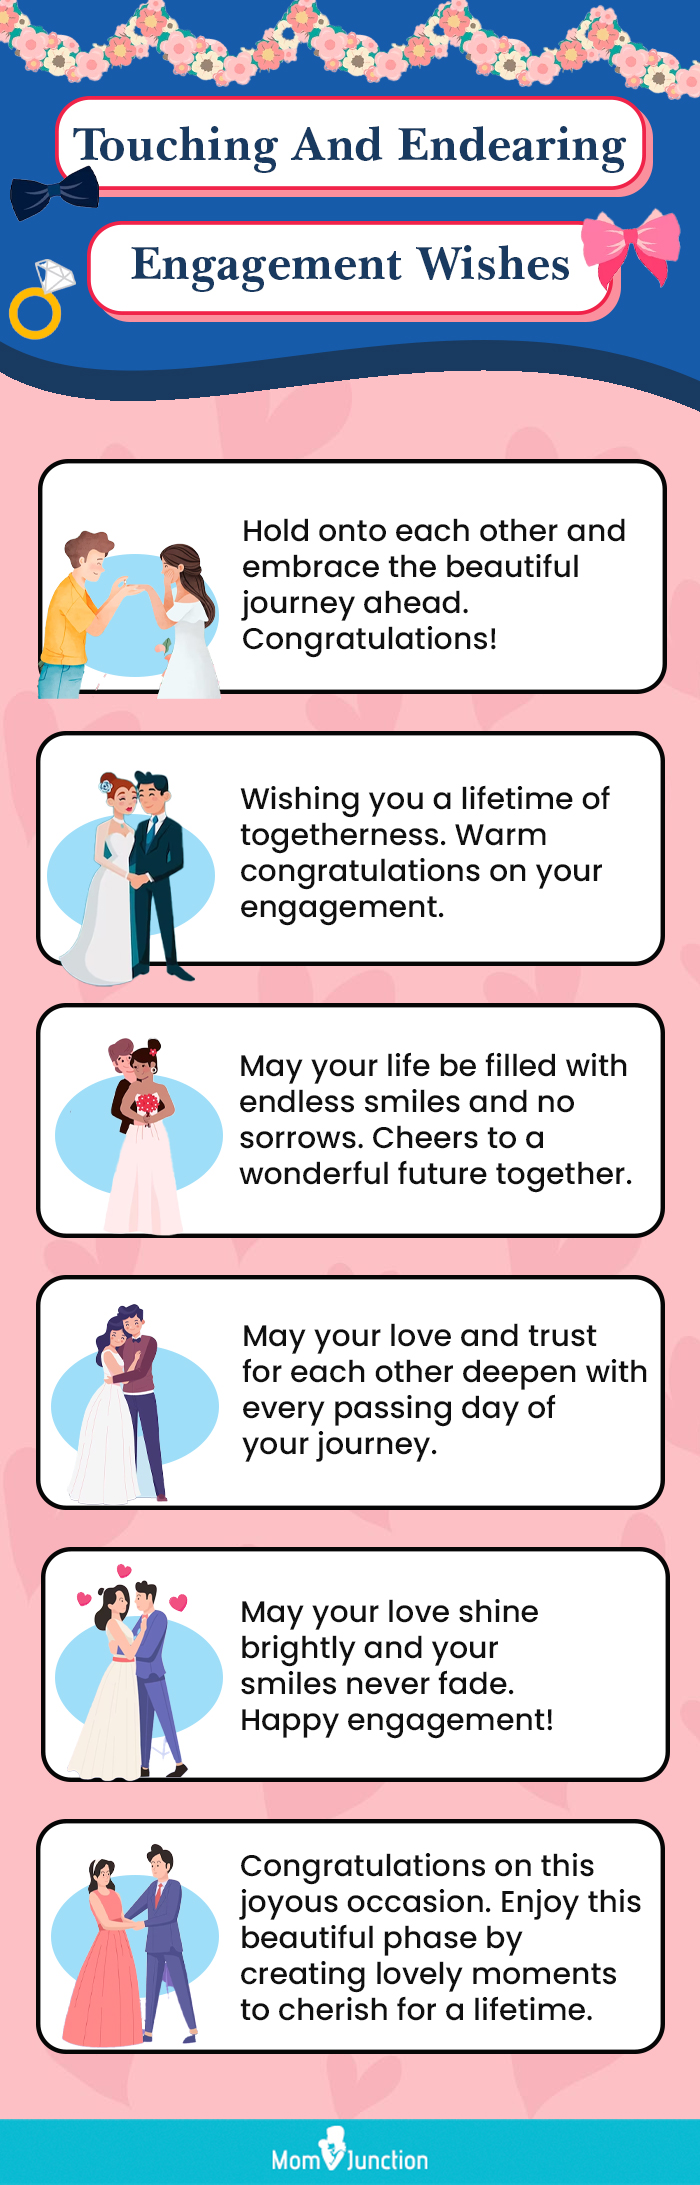 Wedding Wishes for Colleagues and Coworkers